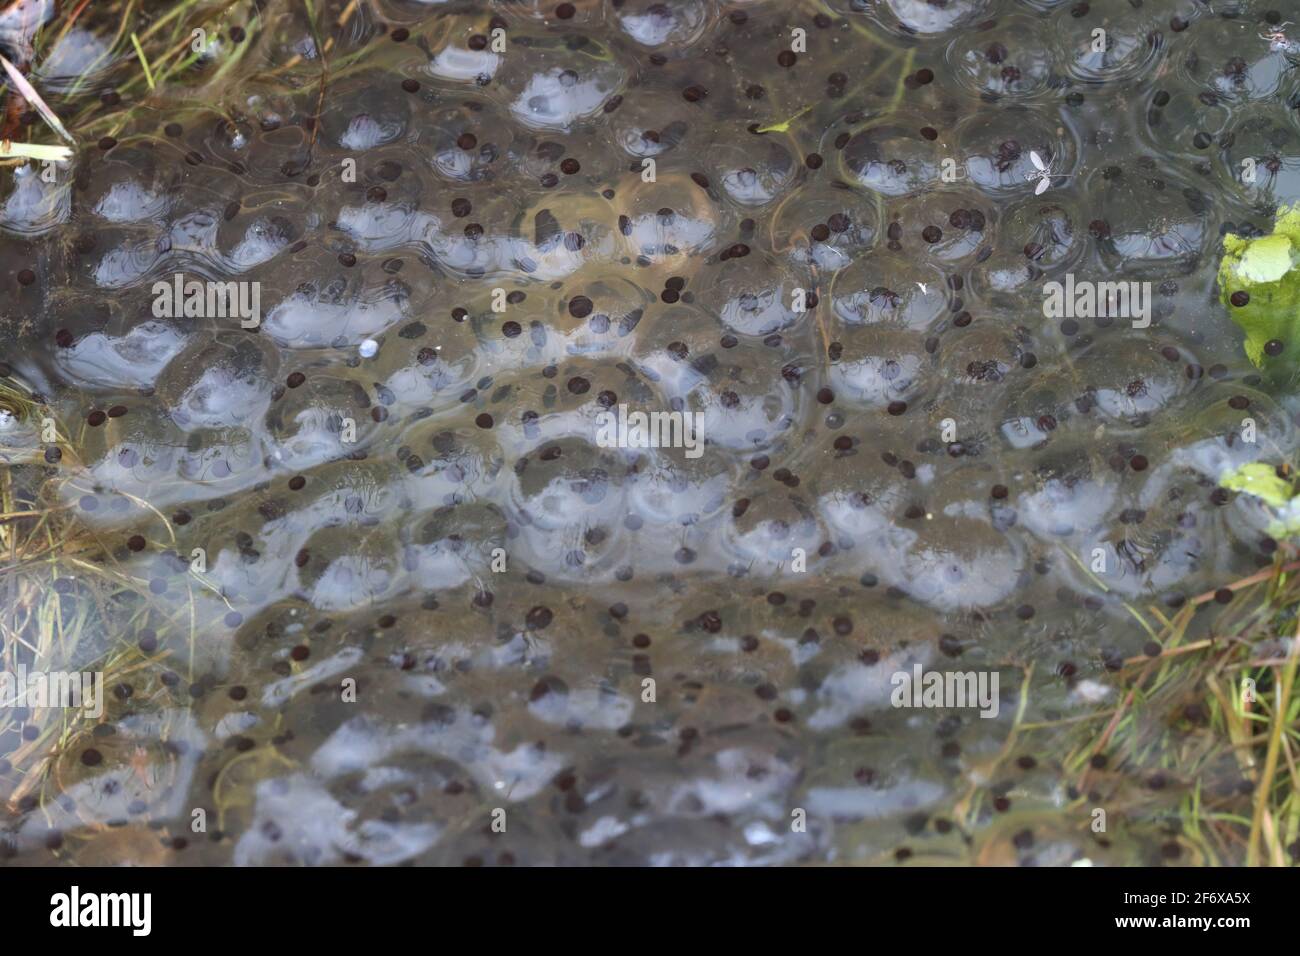 A Cluster of Frog Spawn in a Pond at Springtime. Stock Photo